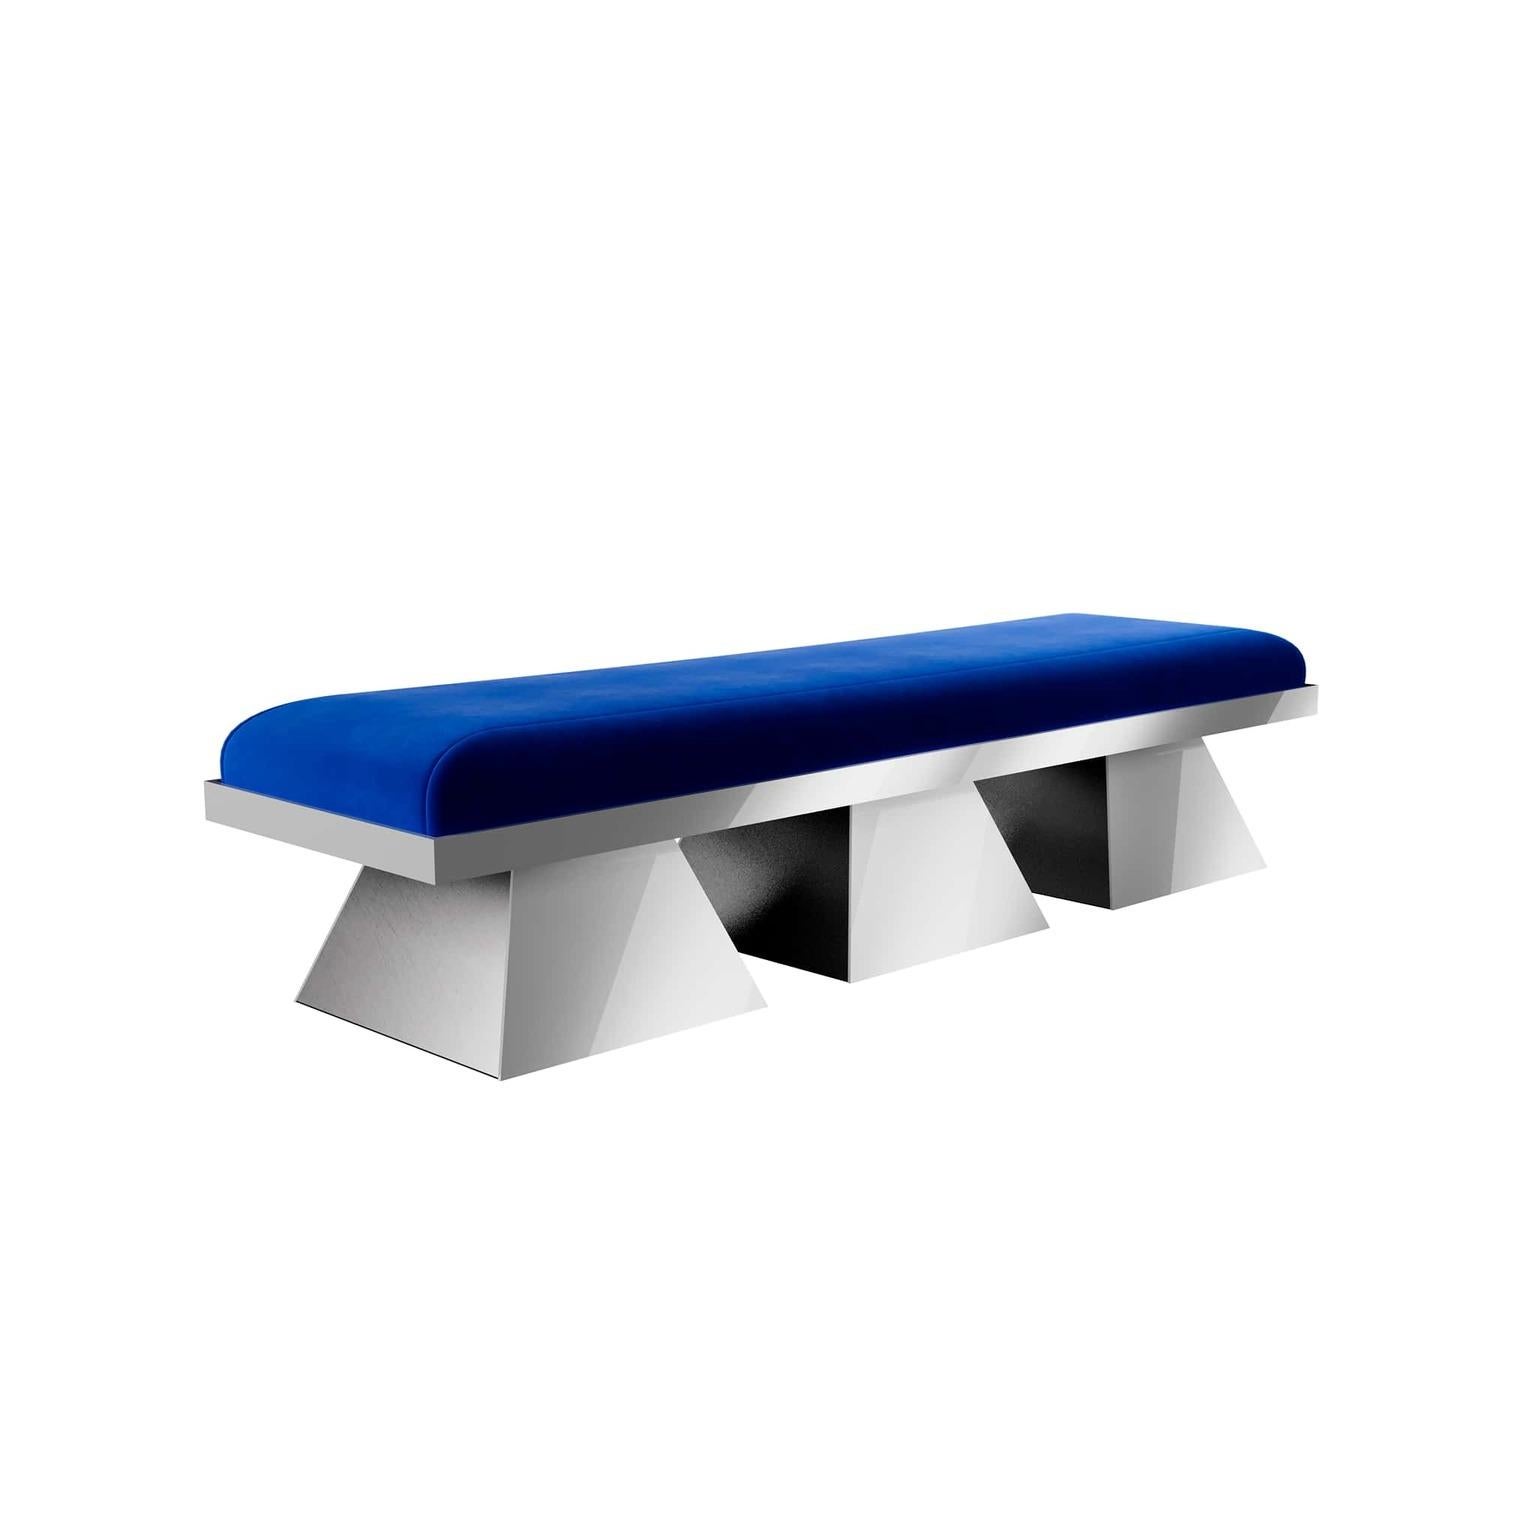 Modern Blue Velvet Upholstered Bench with Grey Lacquer Geometric Base
Moa Bench Blue is an accent bench in a vibrant blue hue. The highly sophisticated silhouette of this bench is the perfect addition to modern bedrooms, living rooms, or entryways